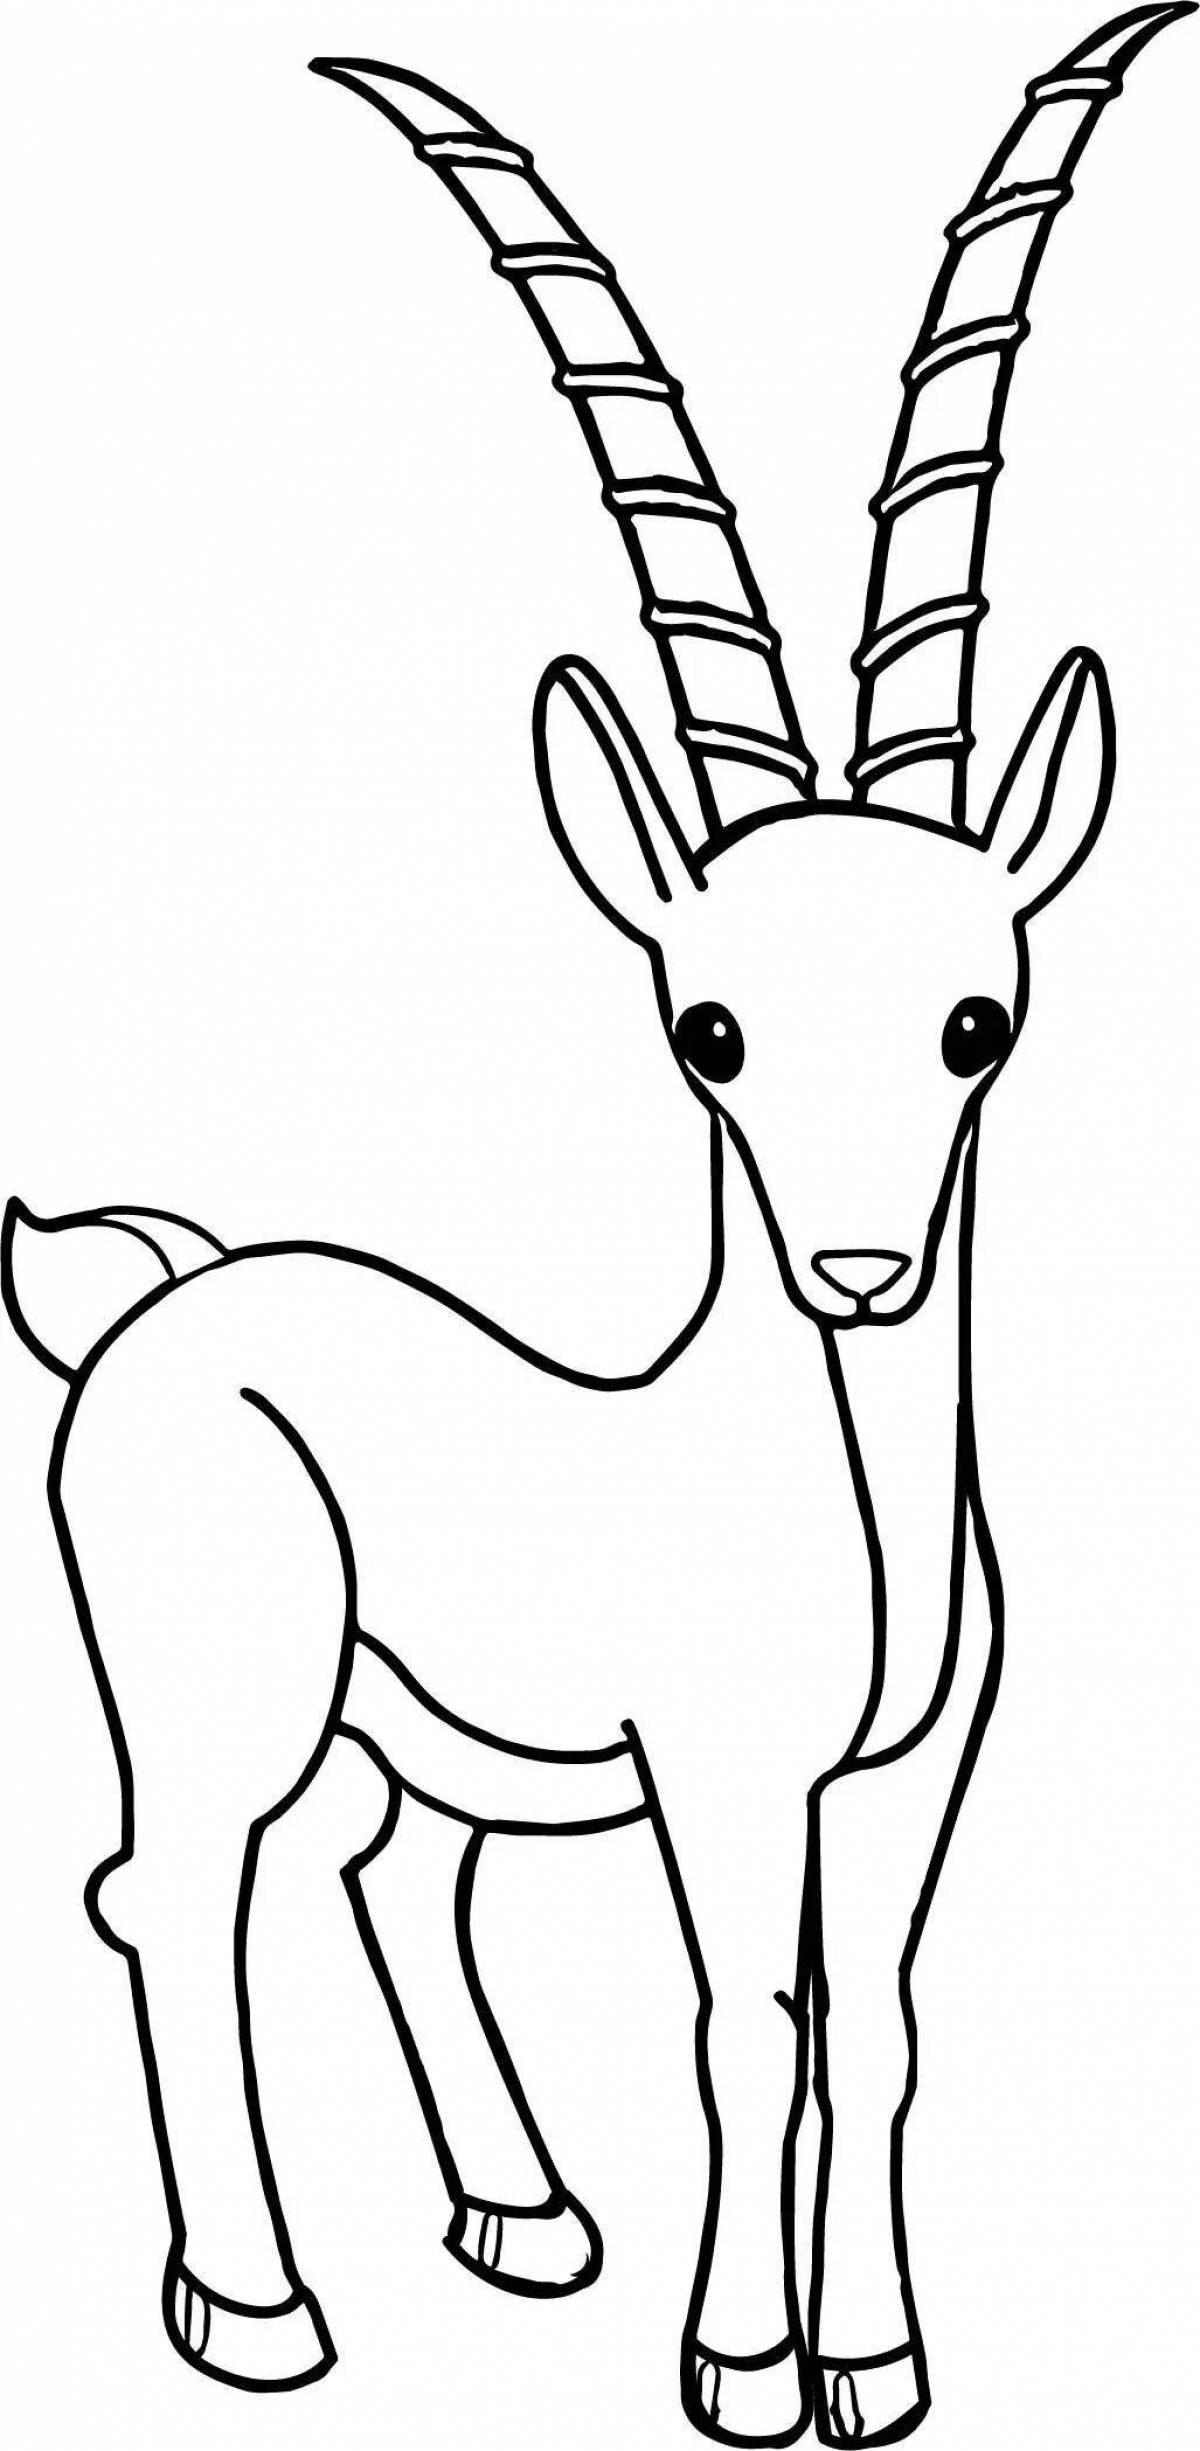 Colorful gazelle coloring book